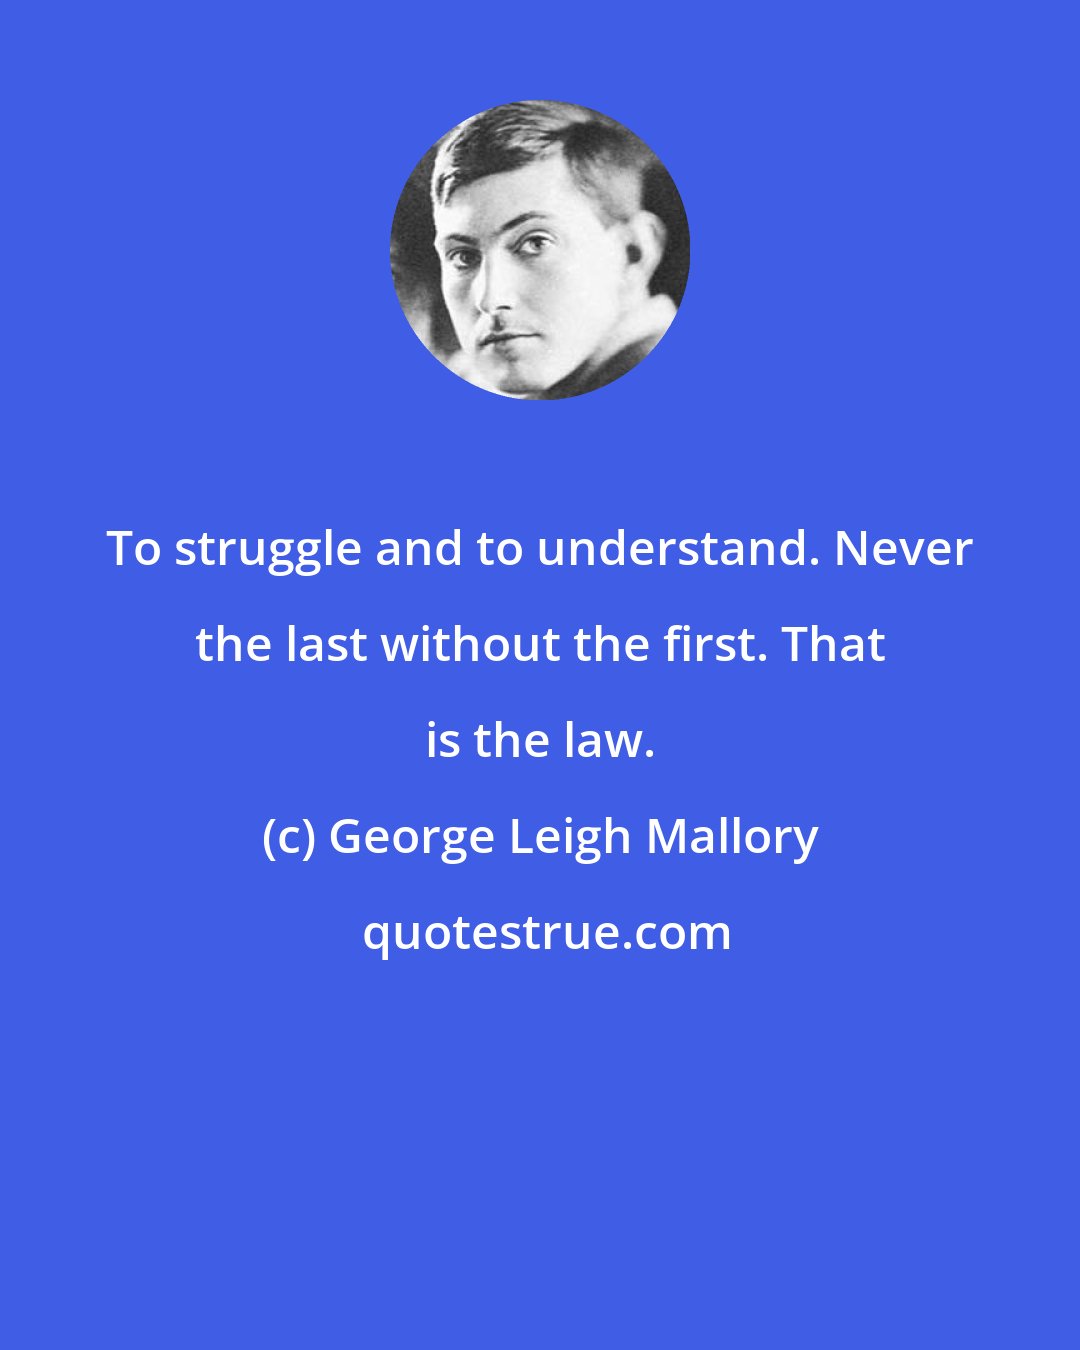 George Leigh Mallory: To struggle and to understand. Never the last without the first. That is the law.